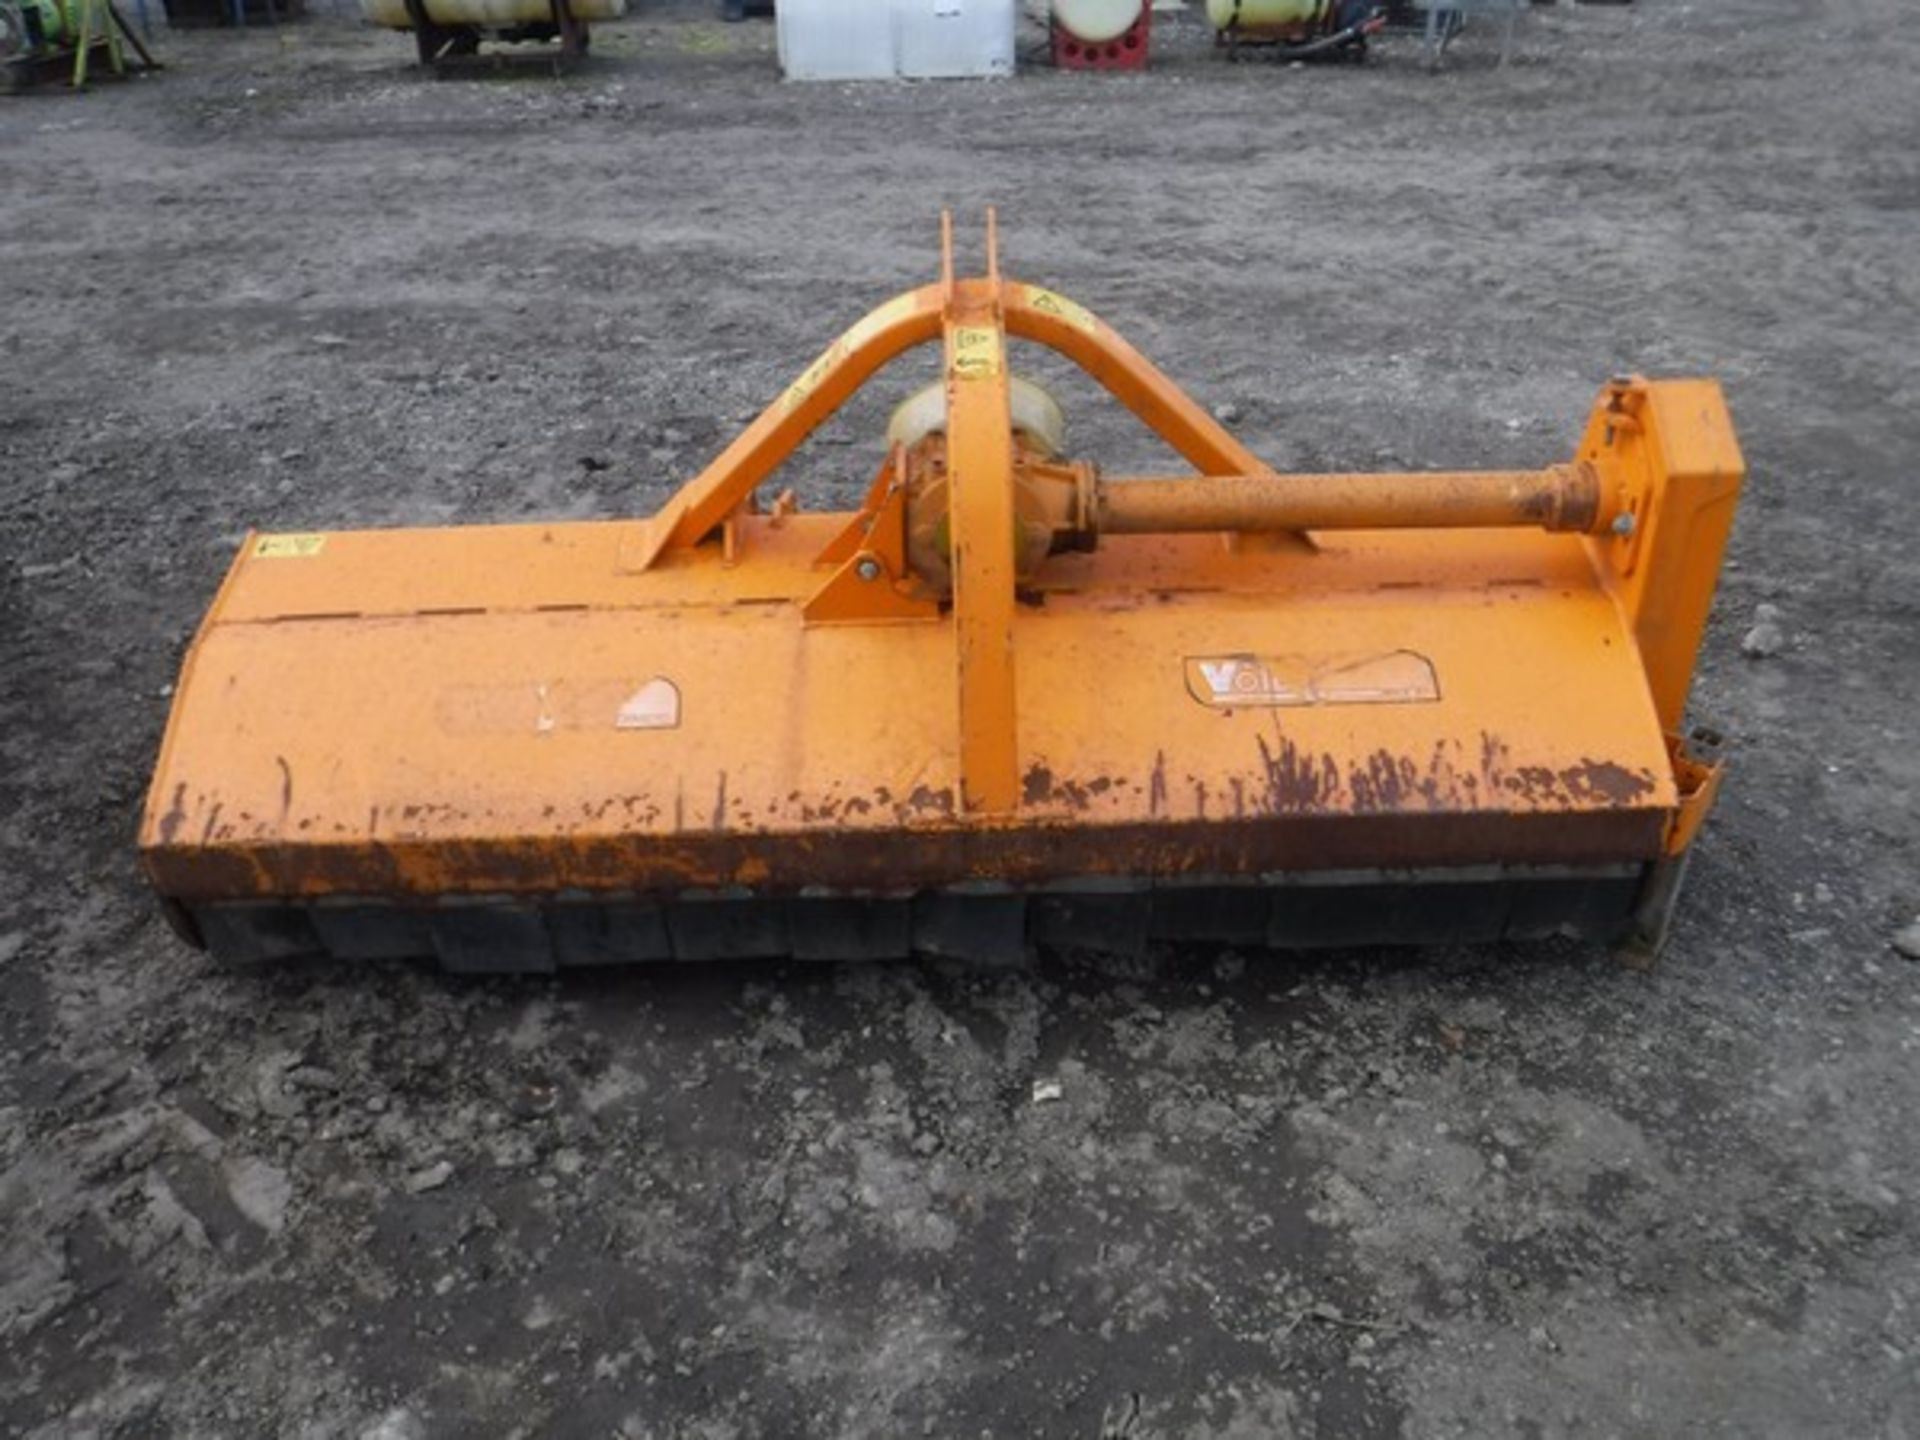 2007 VOTEX FRONT MOUNTED FLAIL MOWER 2.1M - Image 2 of 4